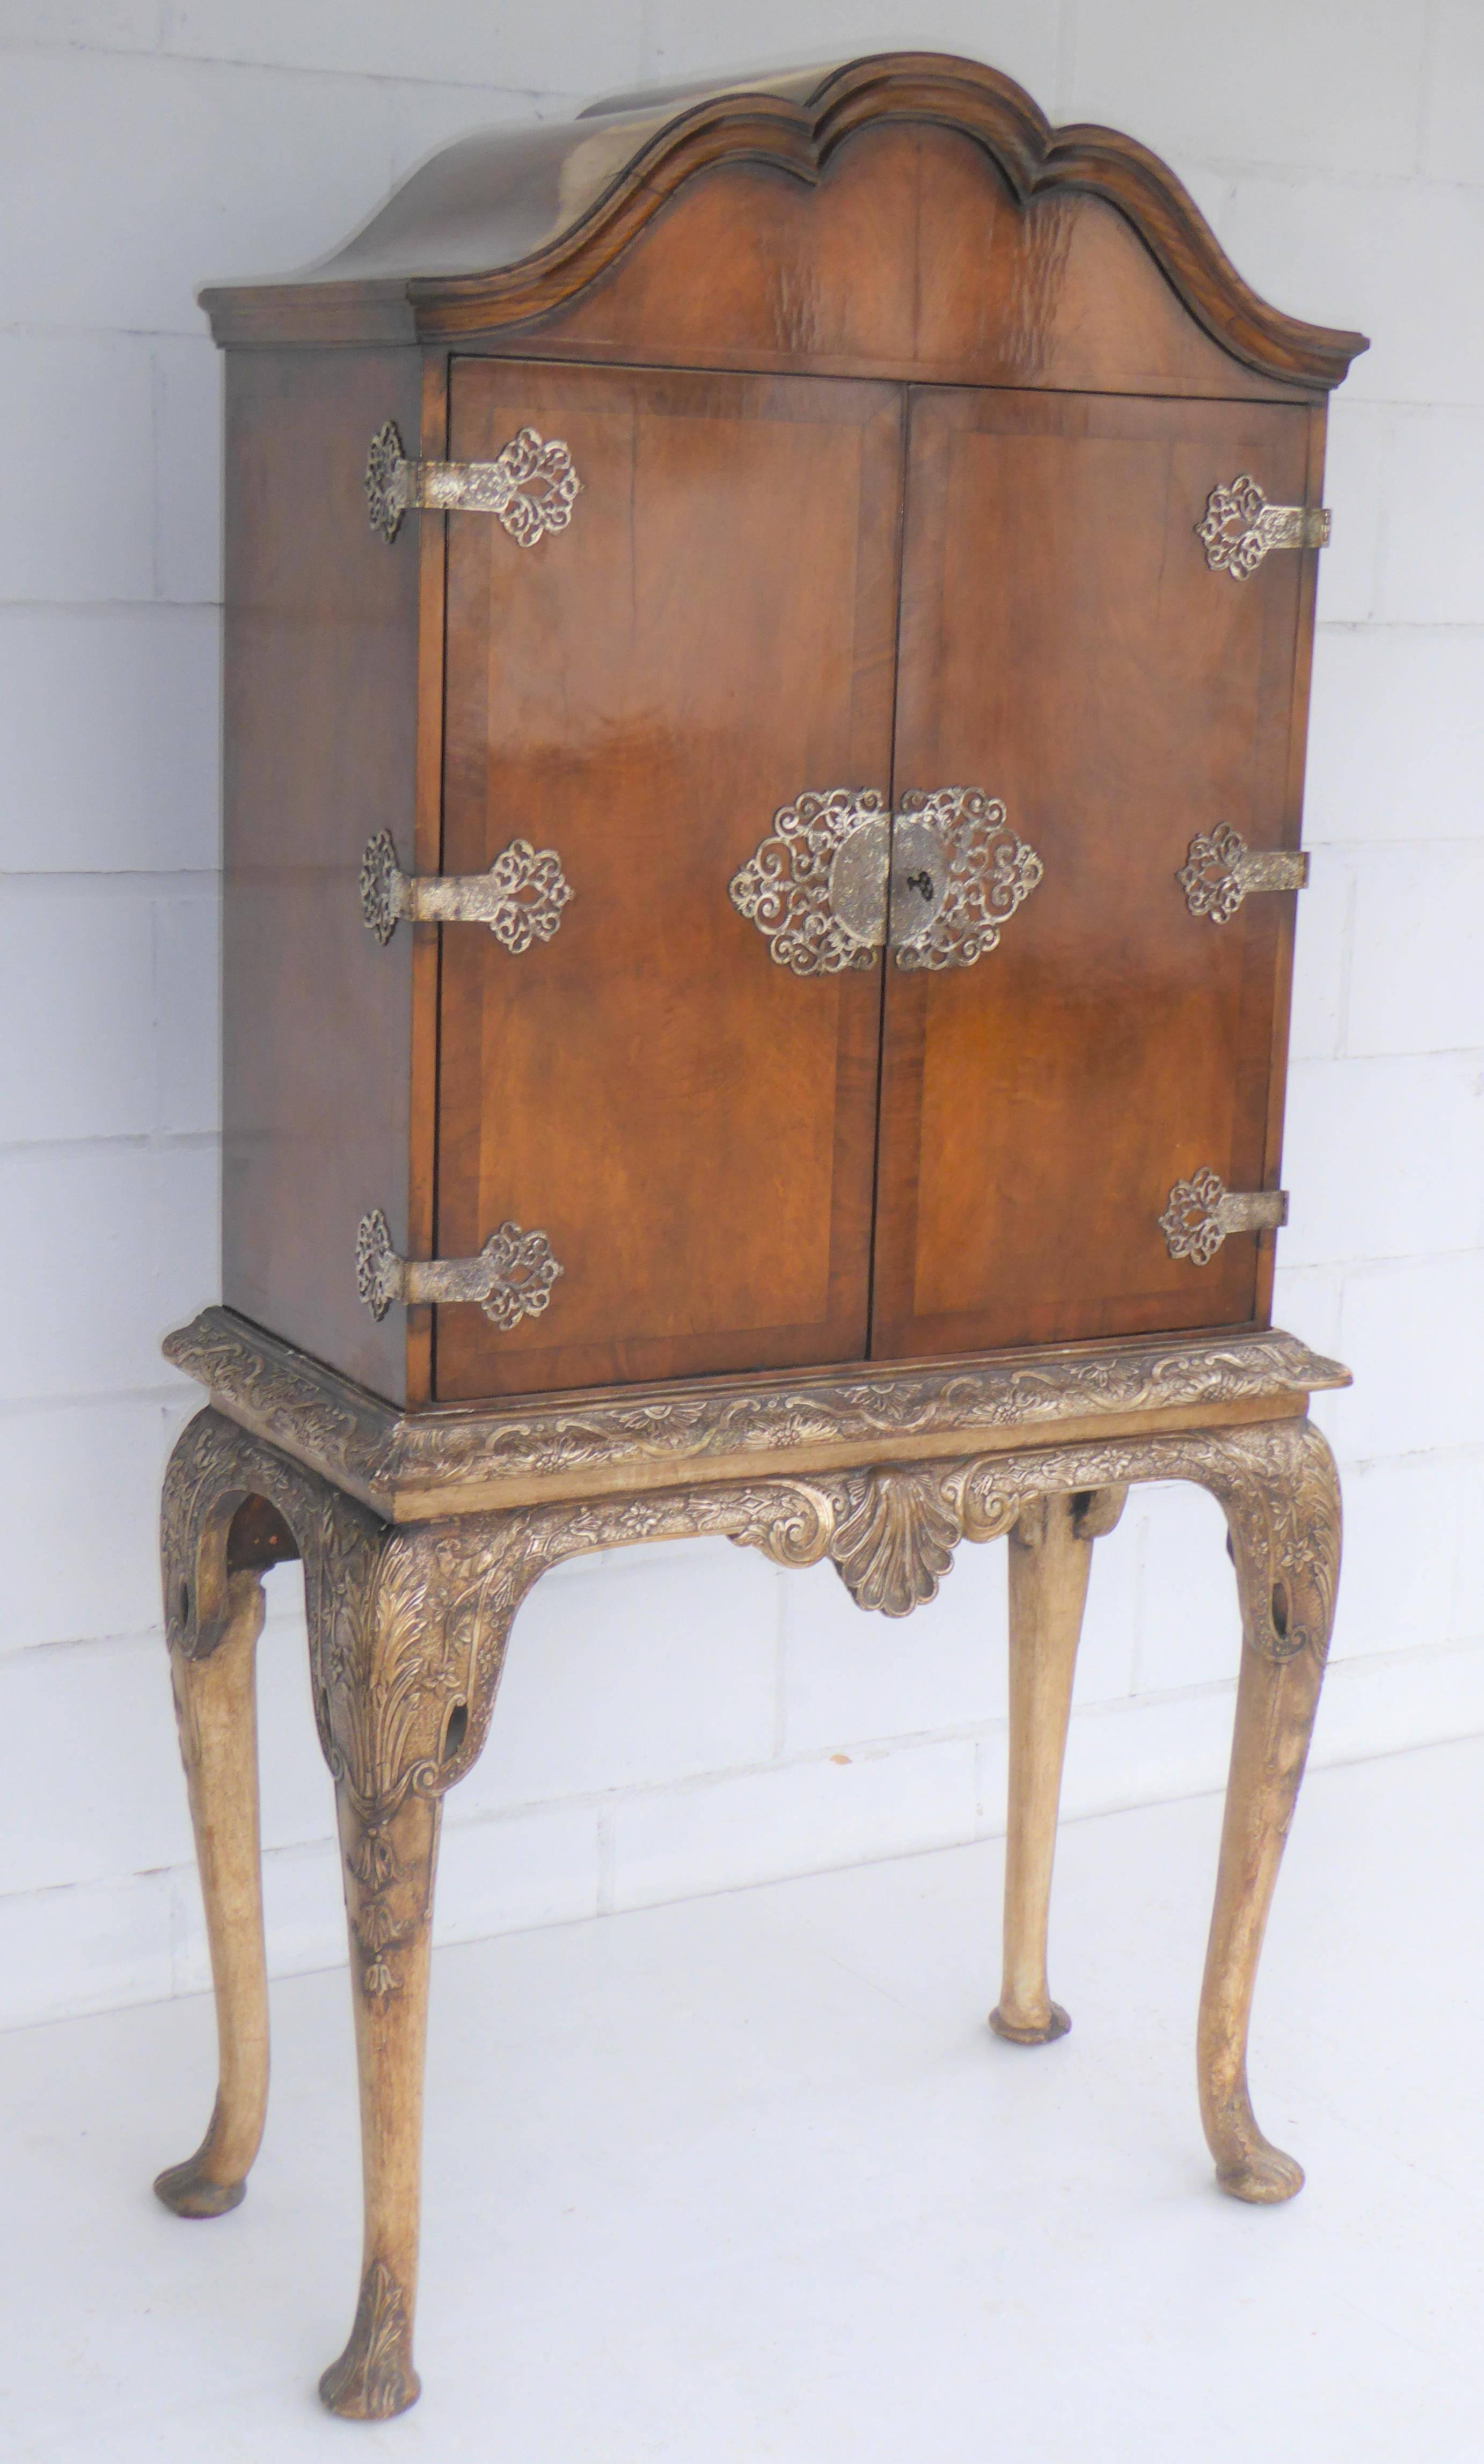 Queen Anne figured walnut cocktail cabinet on silver gilt stand in nice condition having two cupboard doors, when opened reveals a mirrored interior with two glass shelves and glass pull out slide, stands on silver gilt stand with cabriol legs.